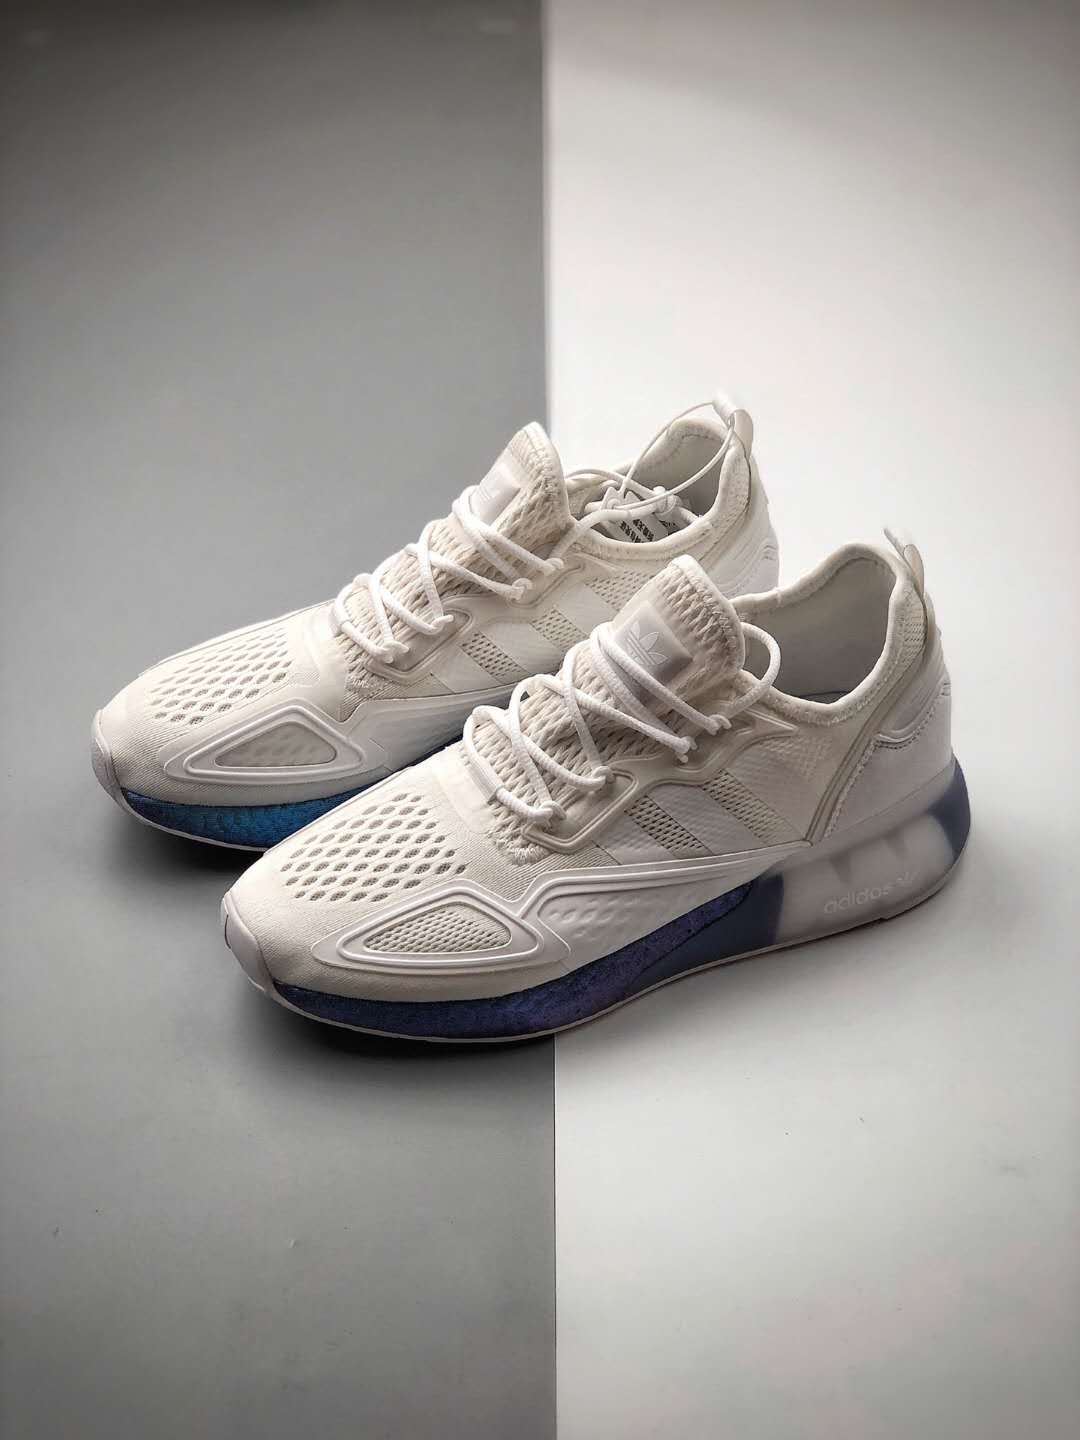 Adidas ZX 2K Boost White Boost Blue Violet FV2928 - Stylish and Comfortable Athletic Shoes